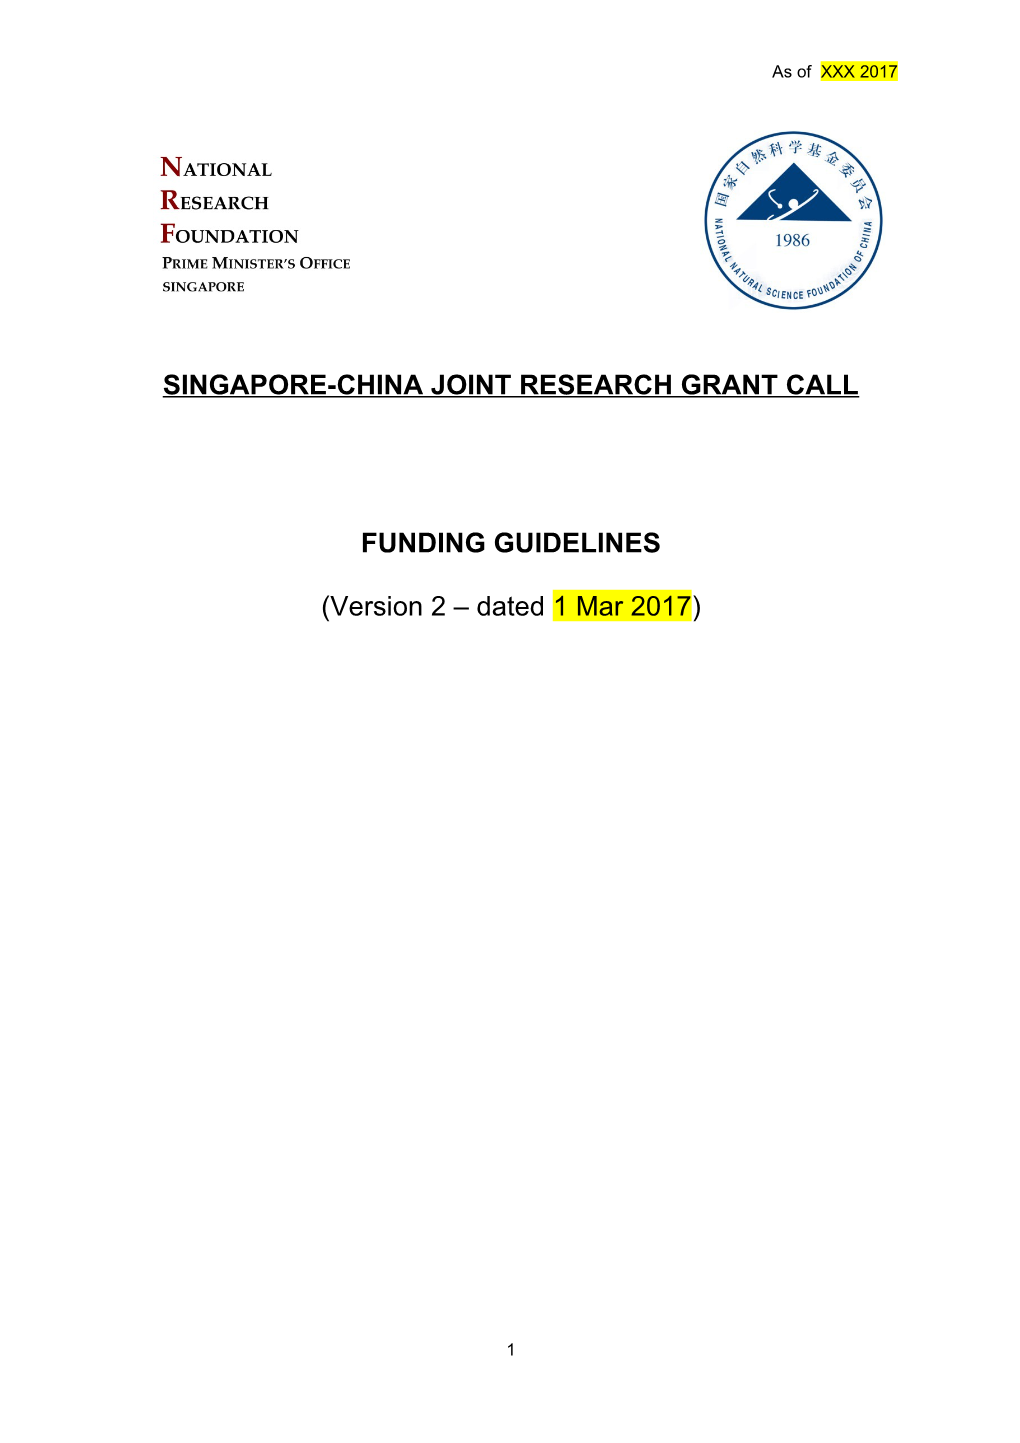 Singapore-China Joint Research Grant Call s1